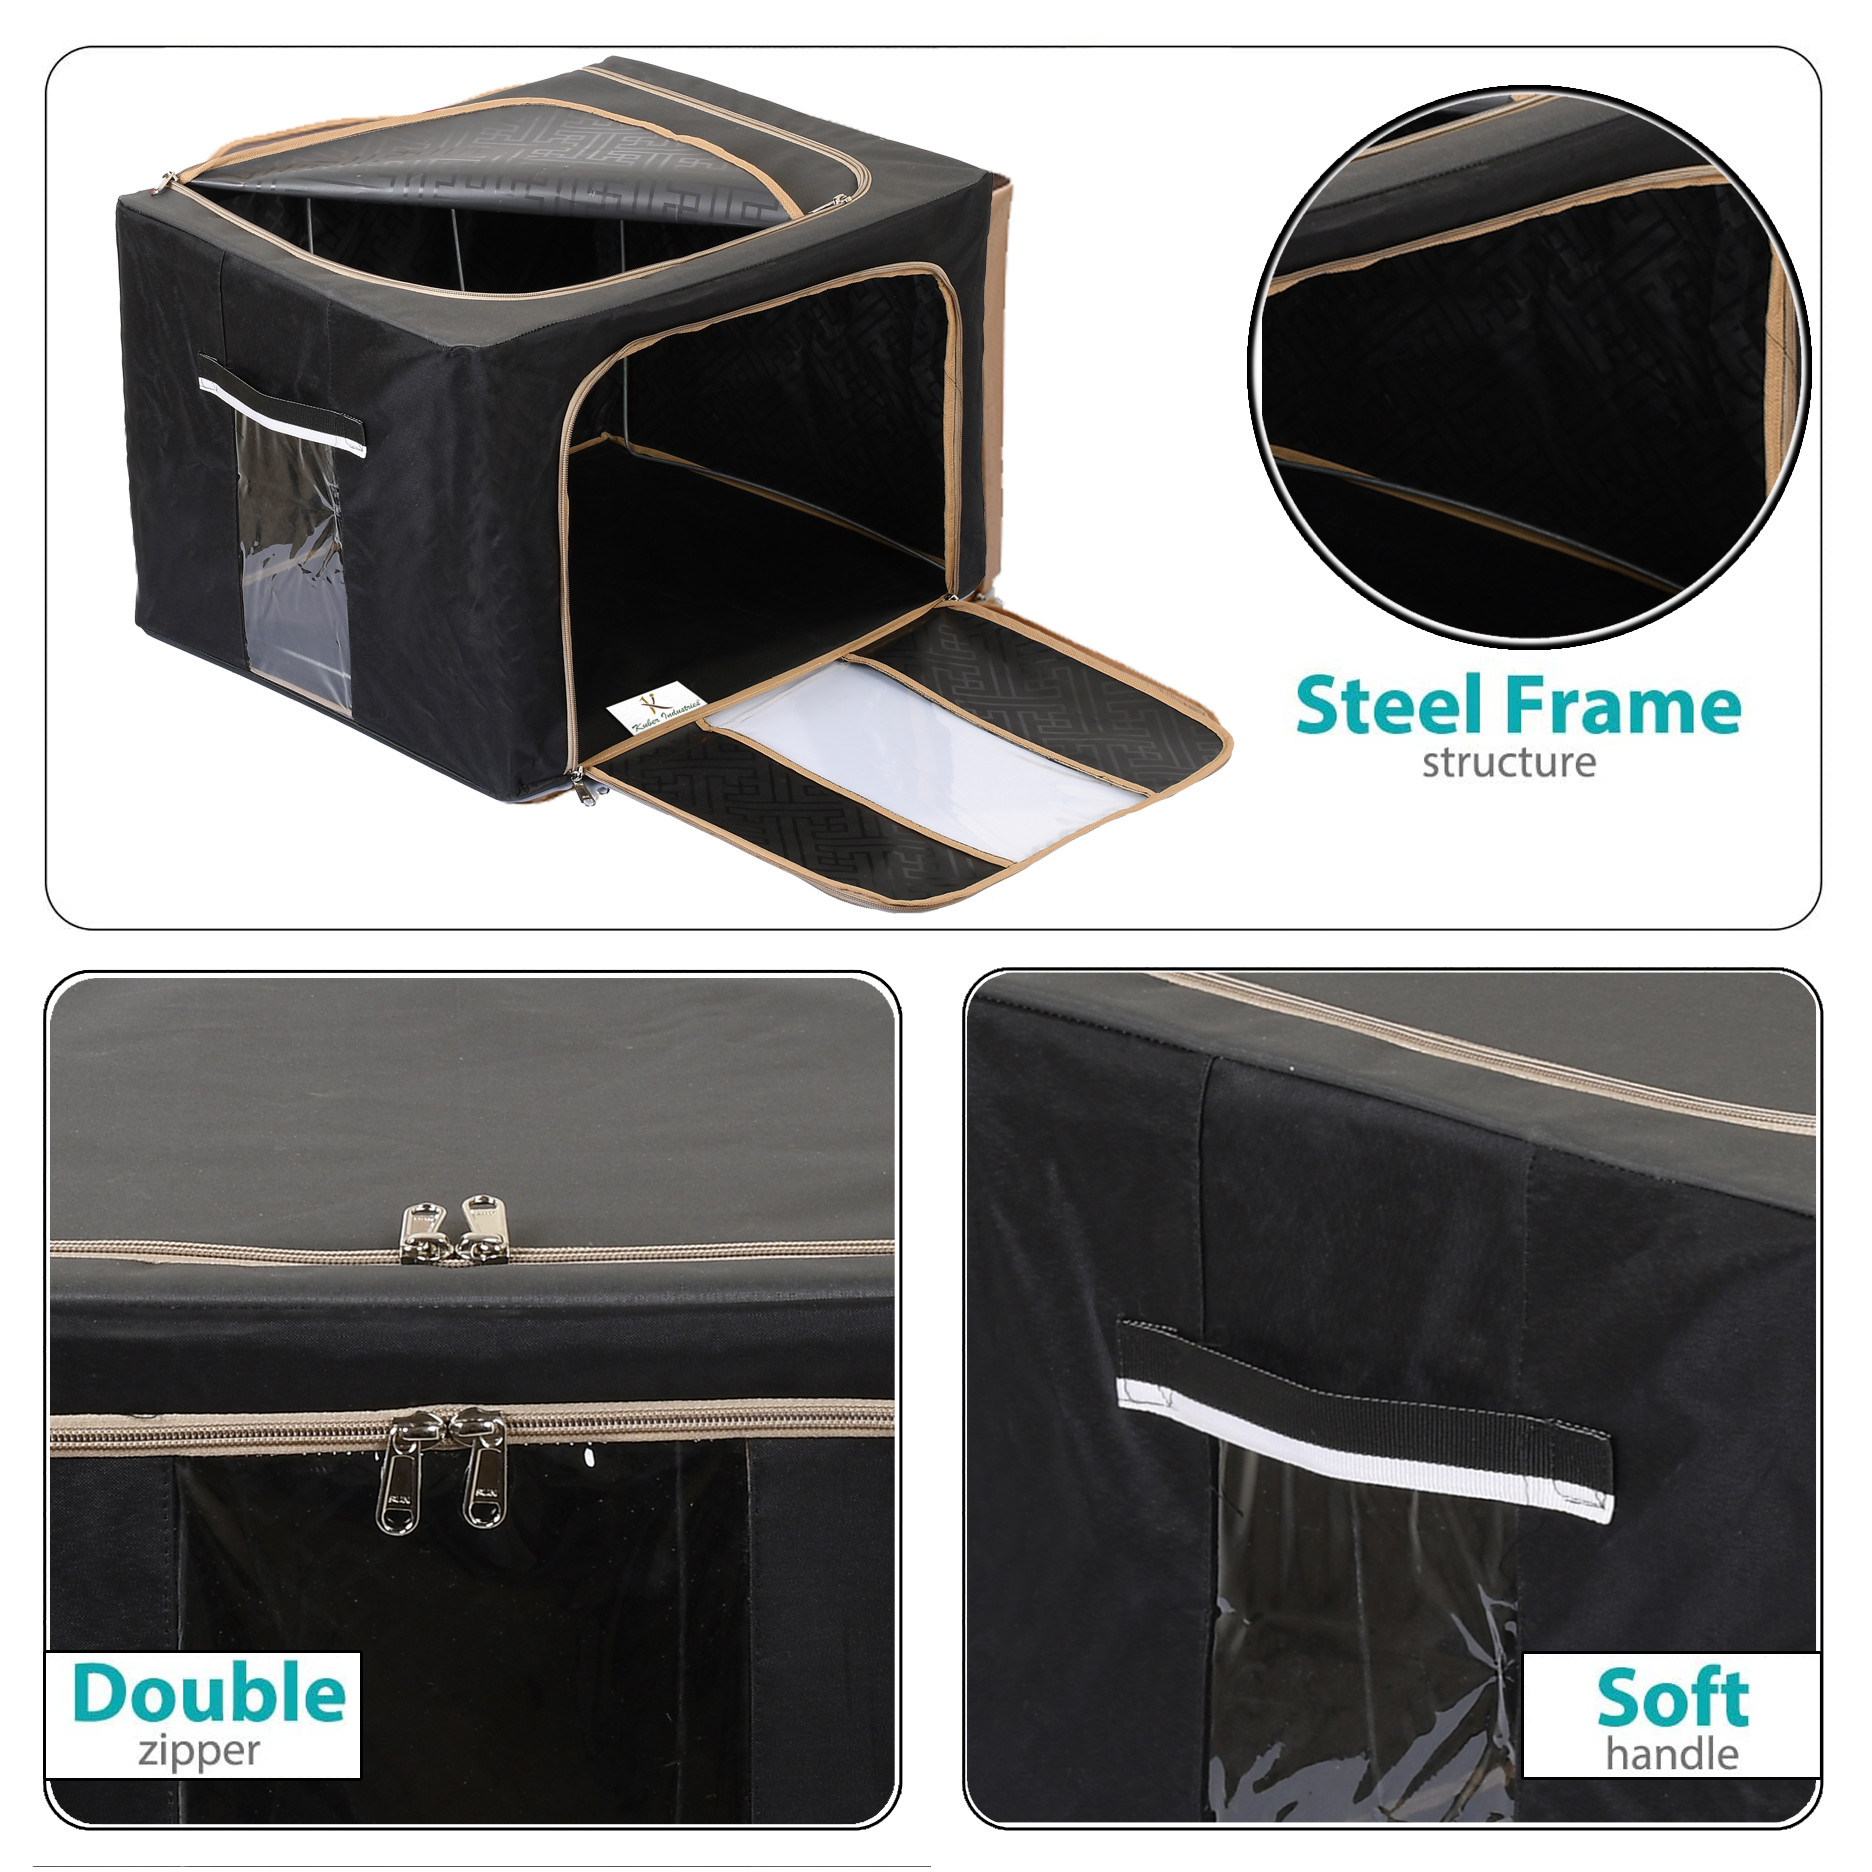 Kuber Industries Steel Frame Storage Box/Organizer For Clothing, Blankets, Bedding With Clear Window, 66Ltr. (Black & Grey)-44KM0313